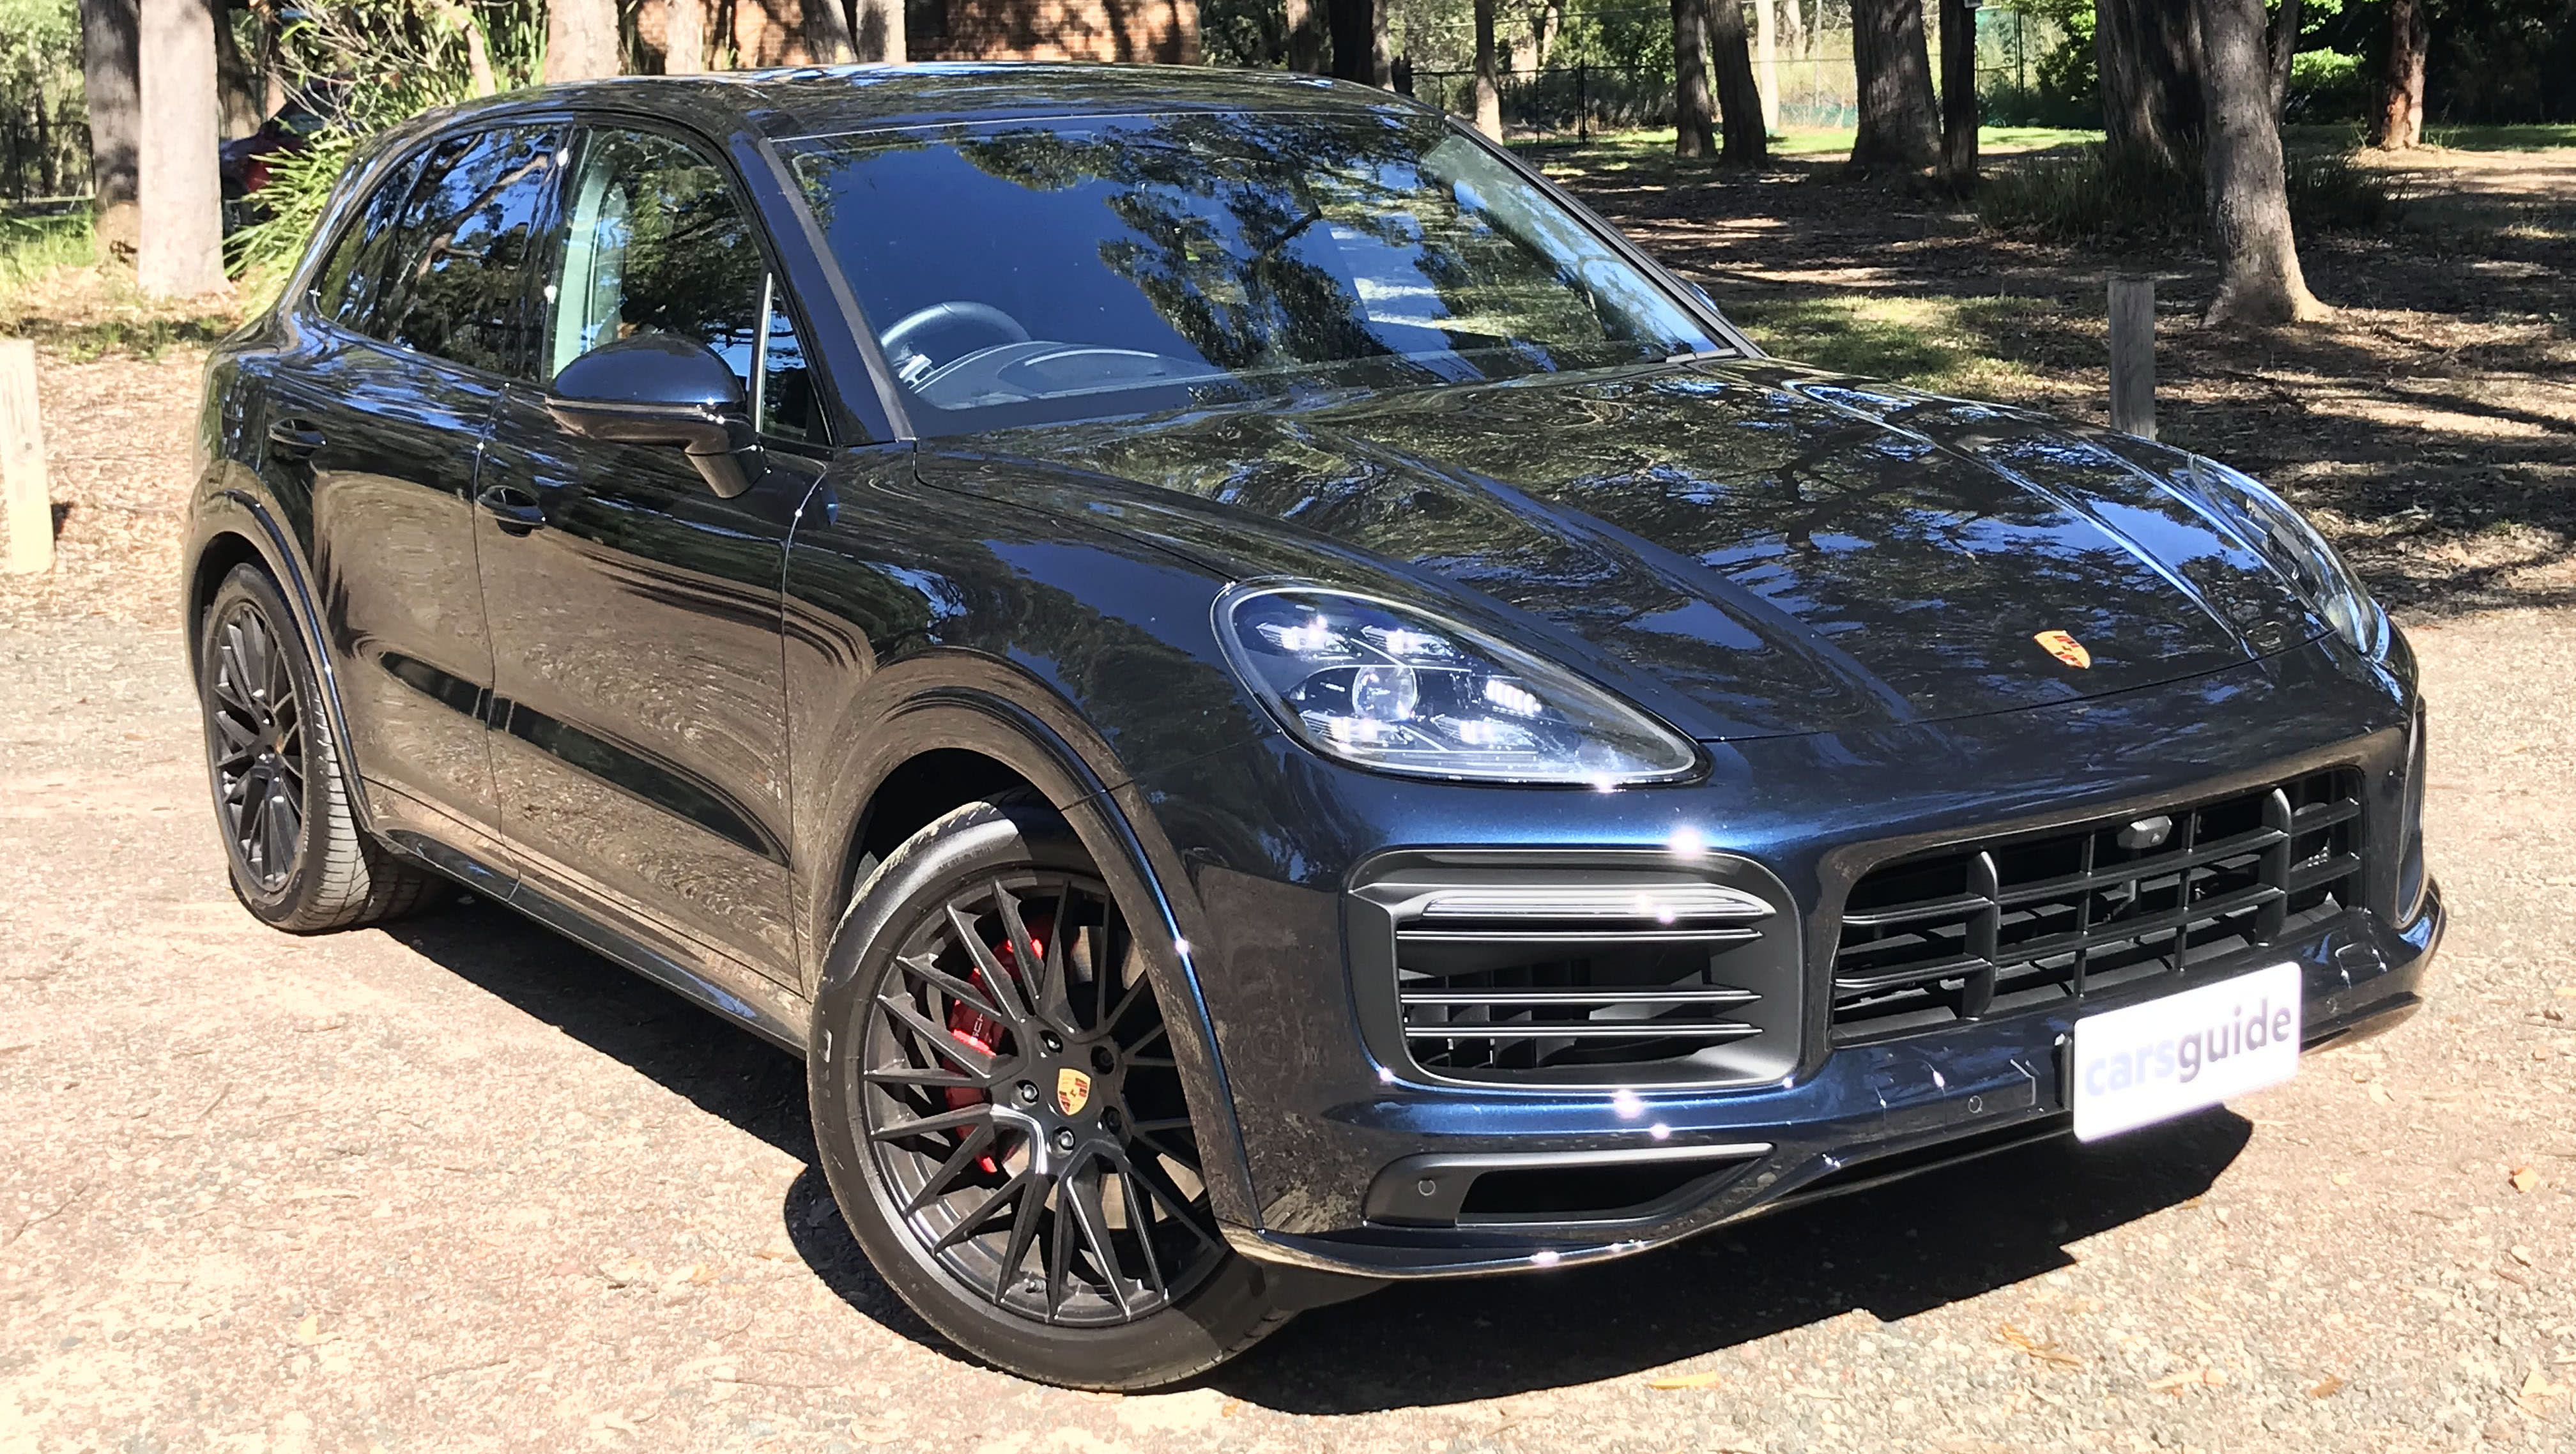 https://carsguide-res.cloudinary.com/image/upload/f_auto%2Cfl_lossy%2Cq_auto%2Ct_default/v1/editorial/review/hero_image/2021-Porsche-Cayanne-GTS-SUV-black-1200x800-2%20copy.jpg